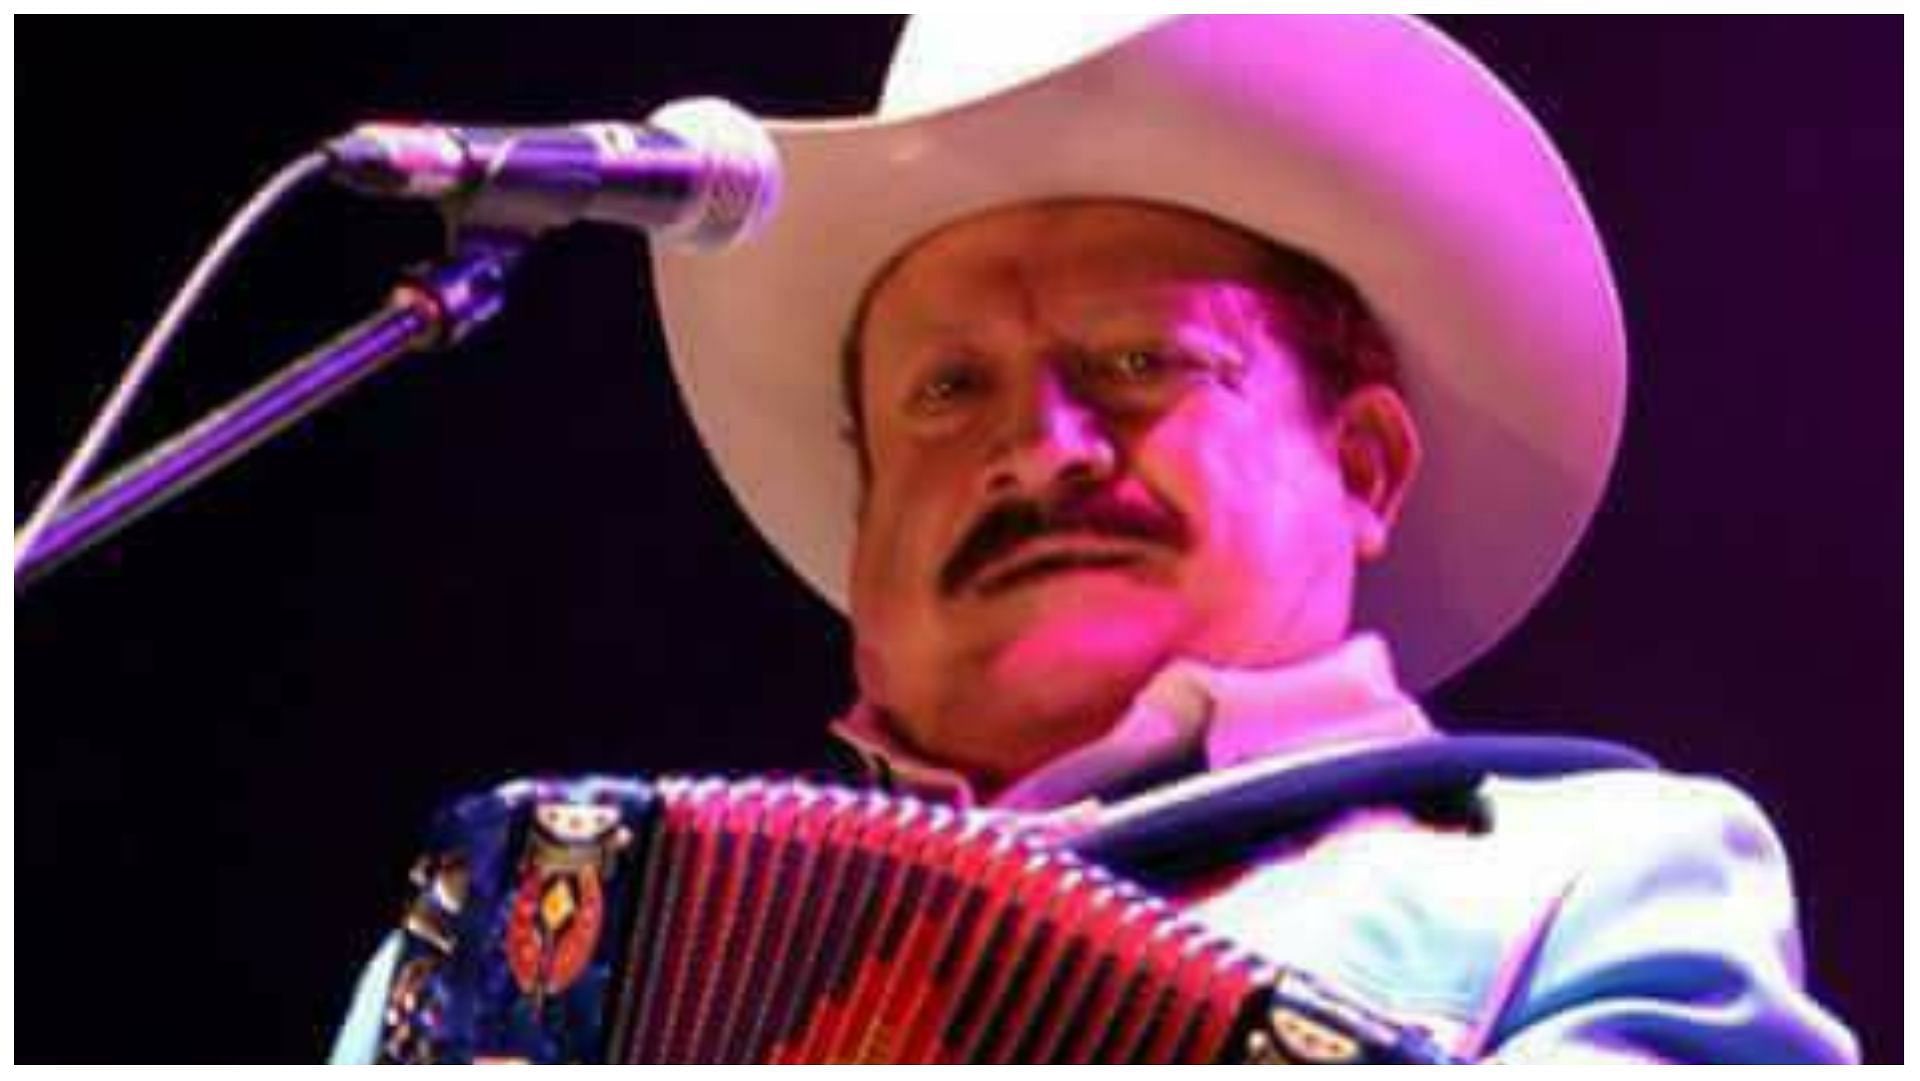 Lupe Tijerina Martinez recently died at the age of 69 (Image via Lupe Tijerina/Facebook)